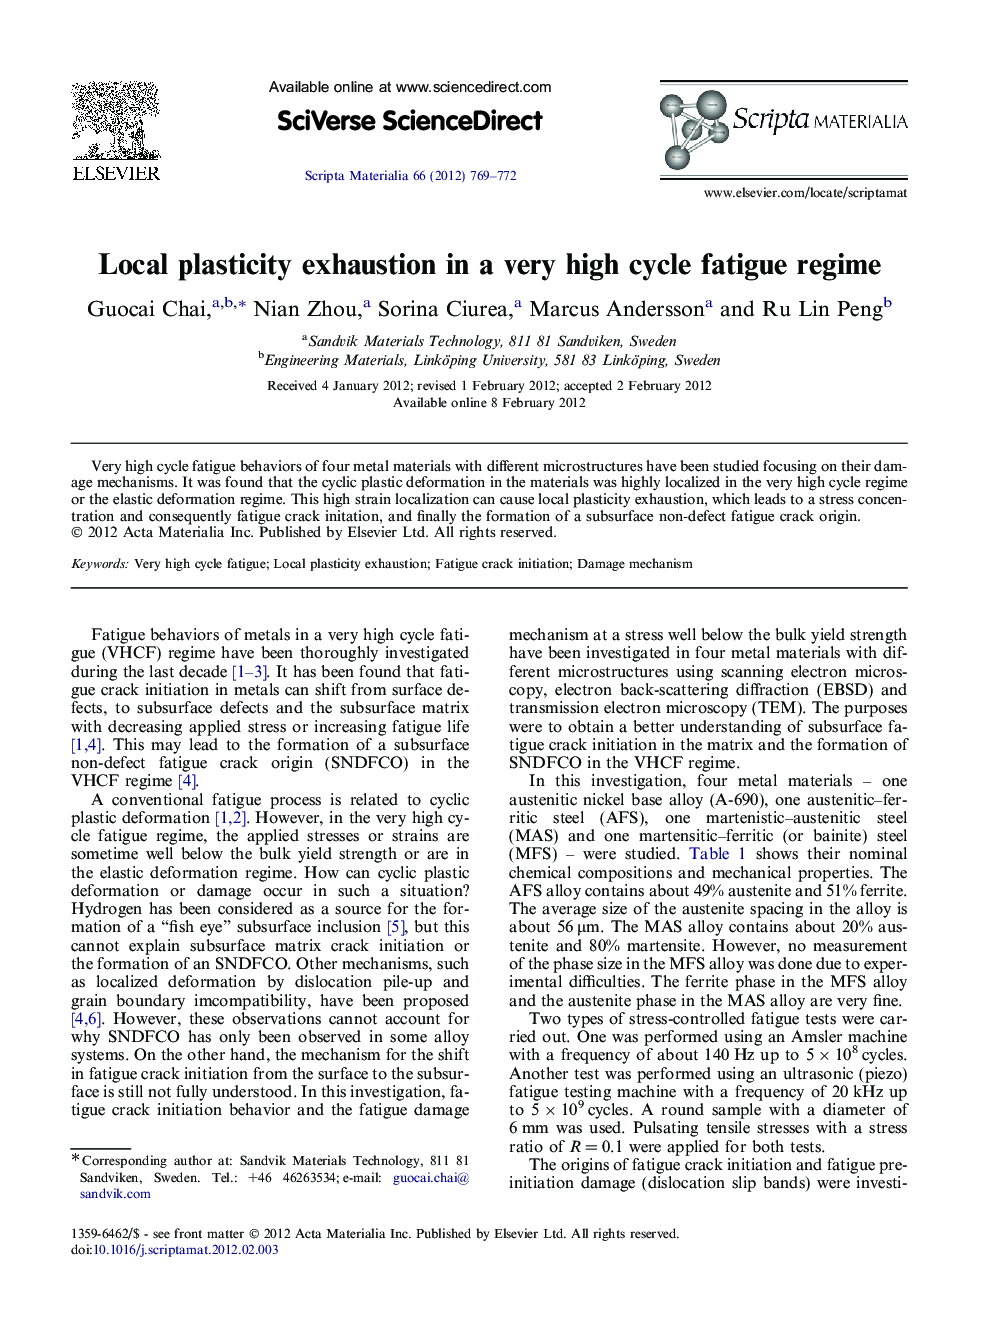 Local plasticity exhaustion in a very high cycle fatigue regime